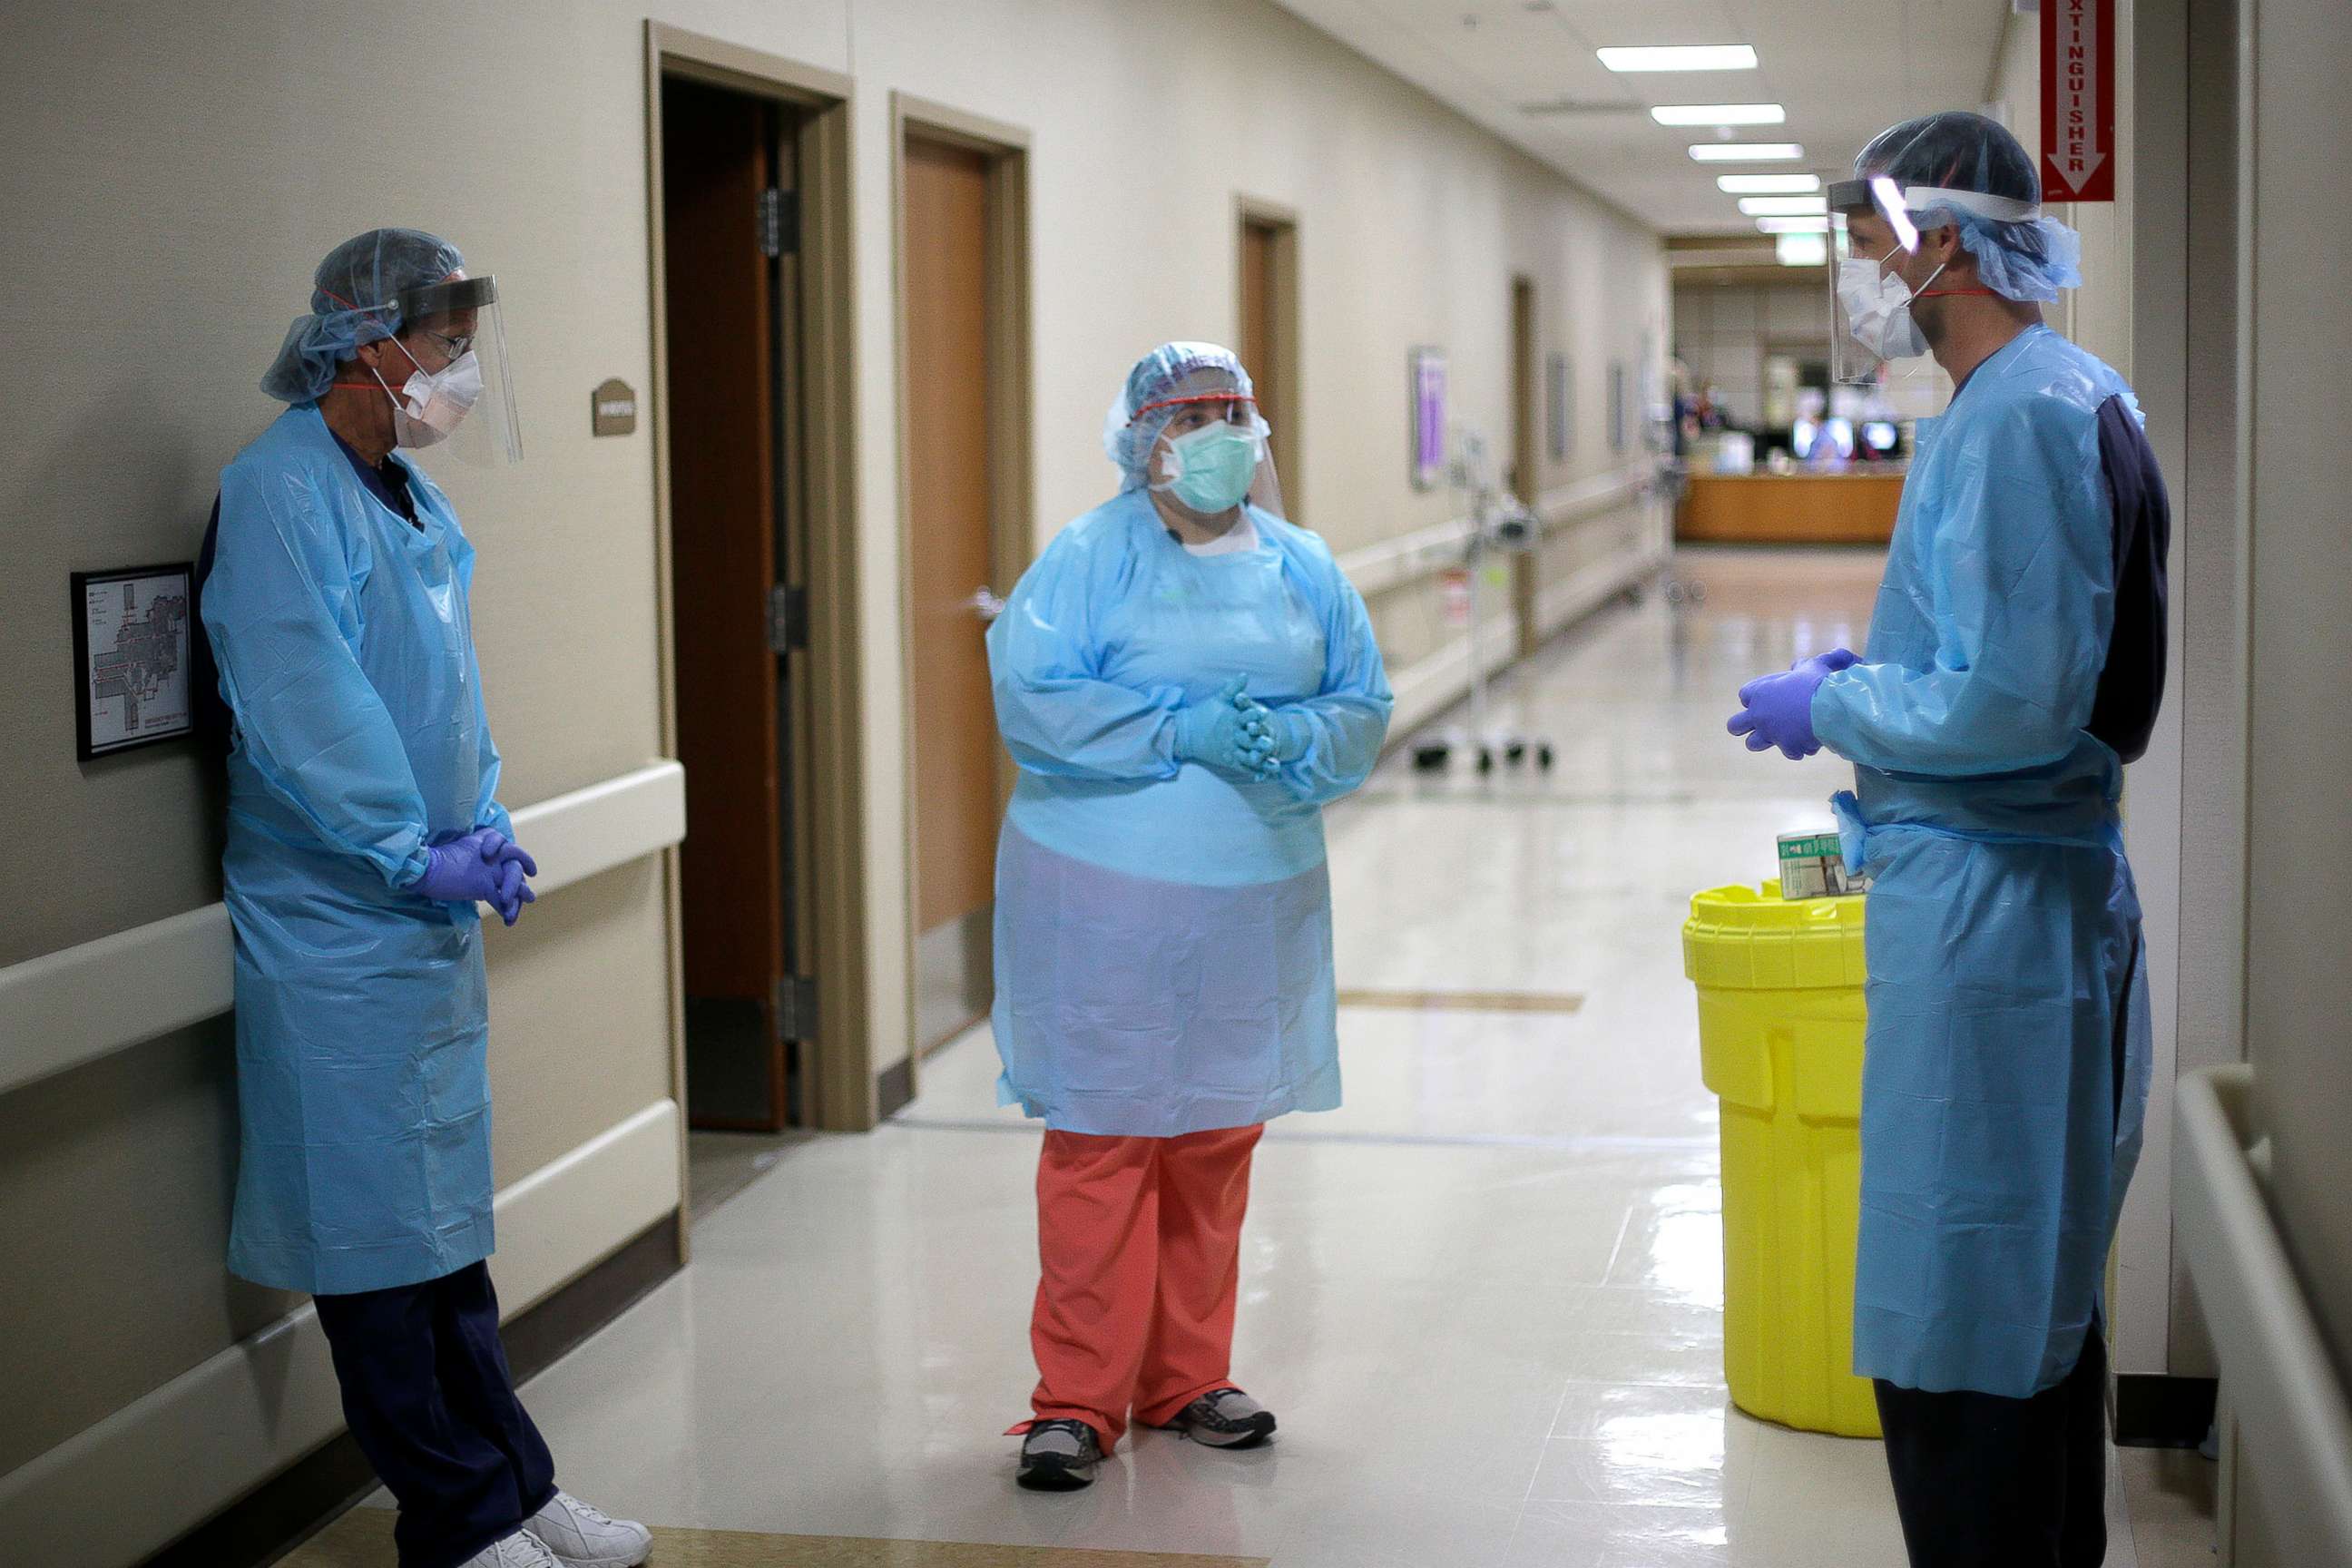 PHOTO: Hospital staff talk after checking on a COVID-19 patient Wednesday, May 20, 2020, at Kearny County Hospital in Lakin, Kan.